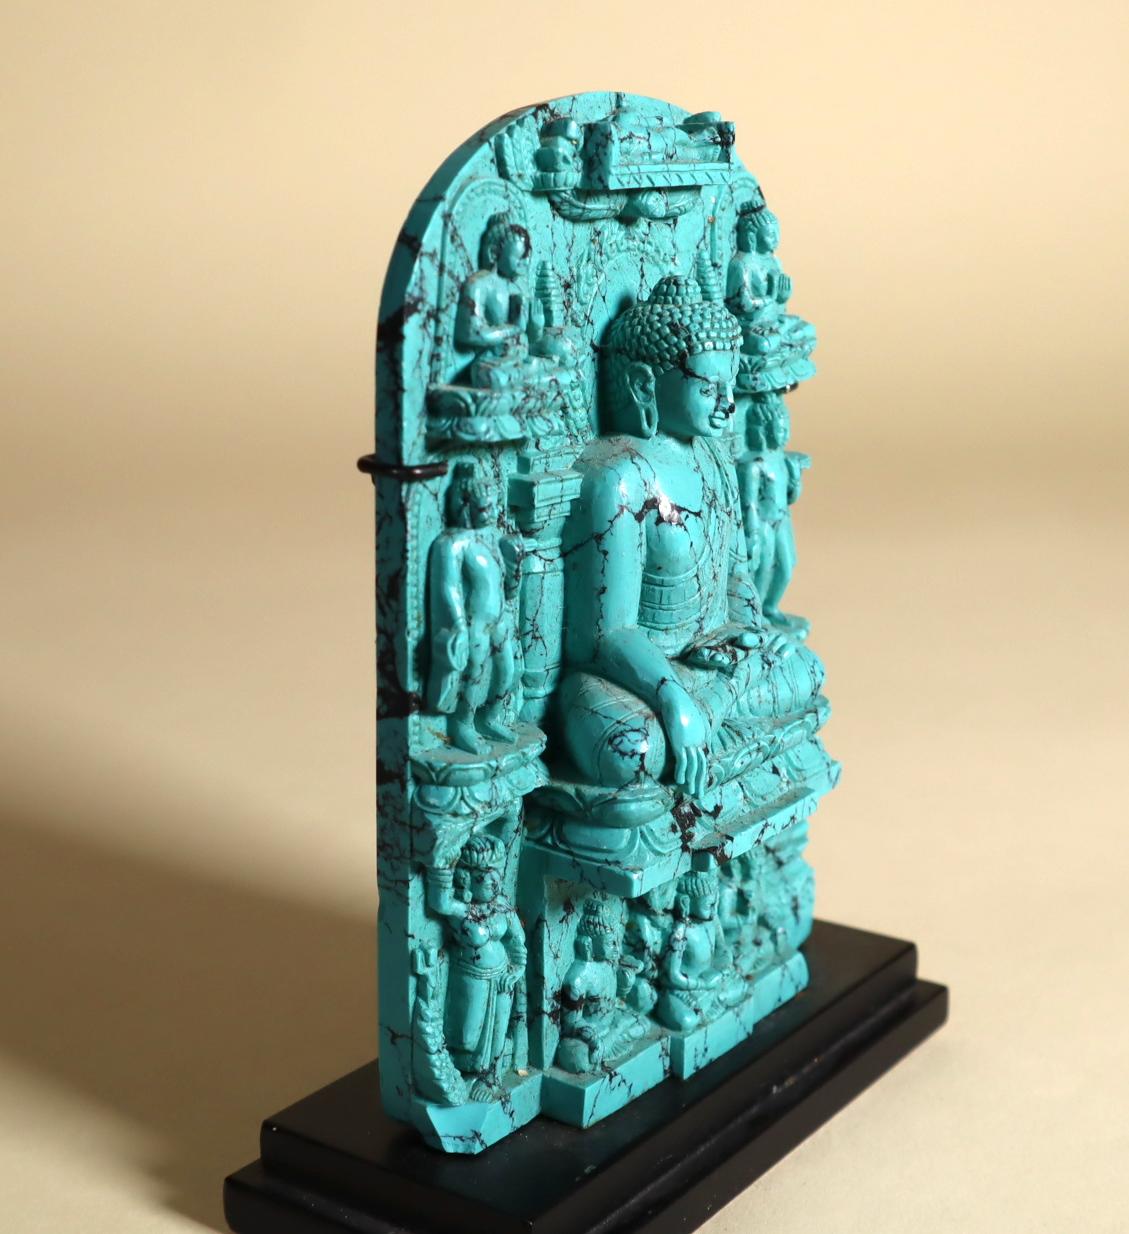 A finely detailed plaque of carved and polished turquoise depicting the life of the Buddha. South Asia. 20th century. 4.50 x 3 x 3/4 inches. With a custom metal stand that also has a wall mount option. Height of stand is 1/2 inch. 
Provenance: